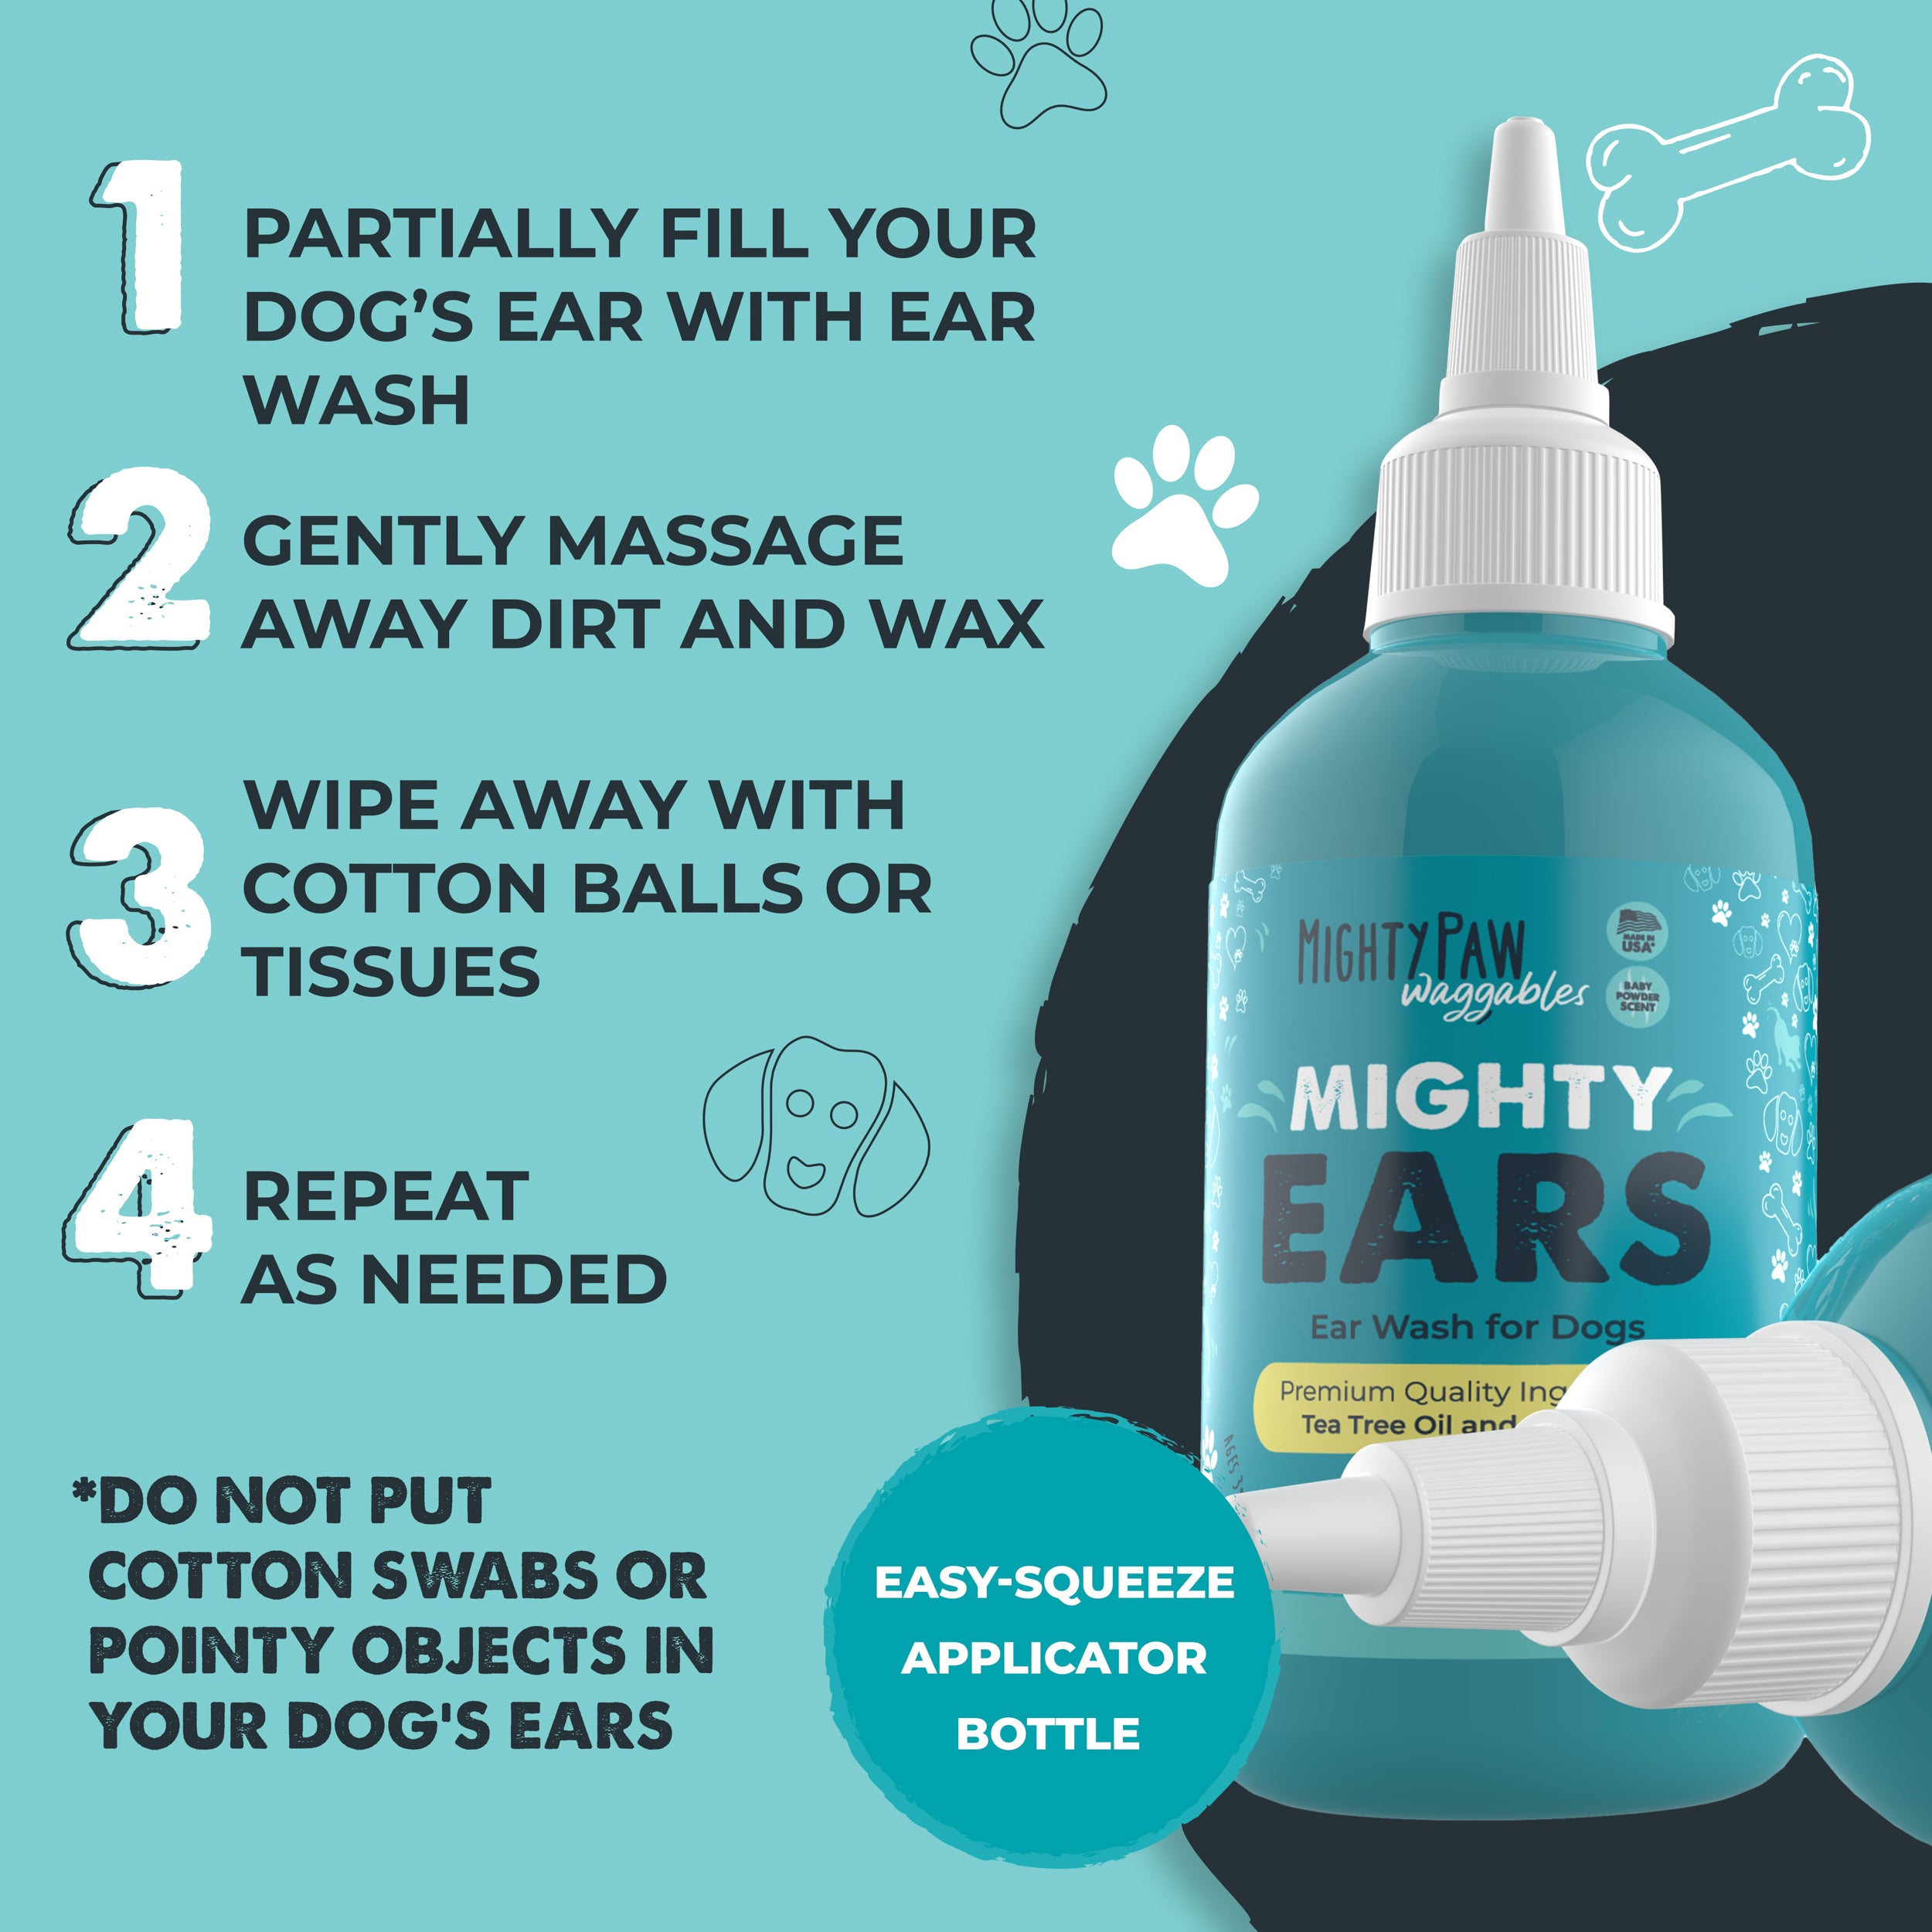 Mighty Ears Ear Wash for Dogs